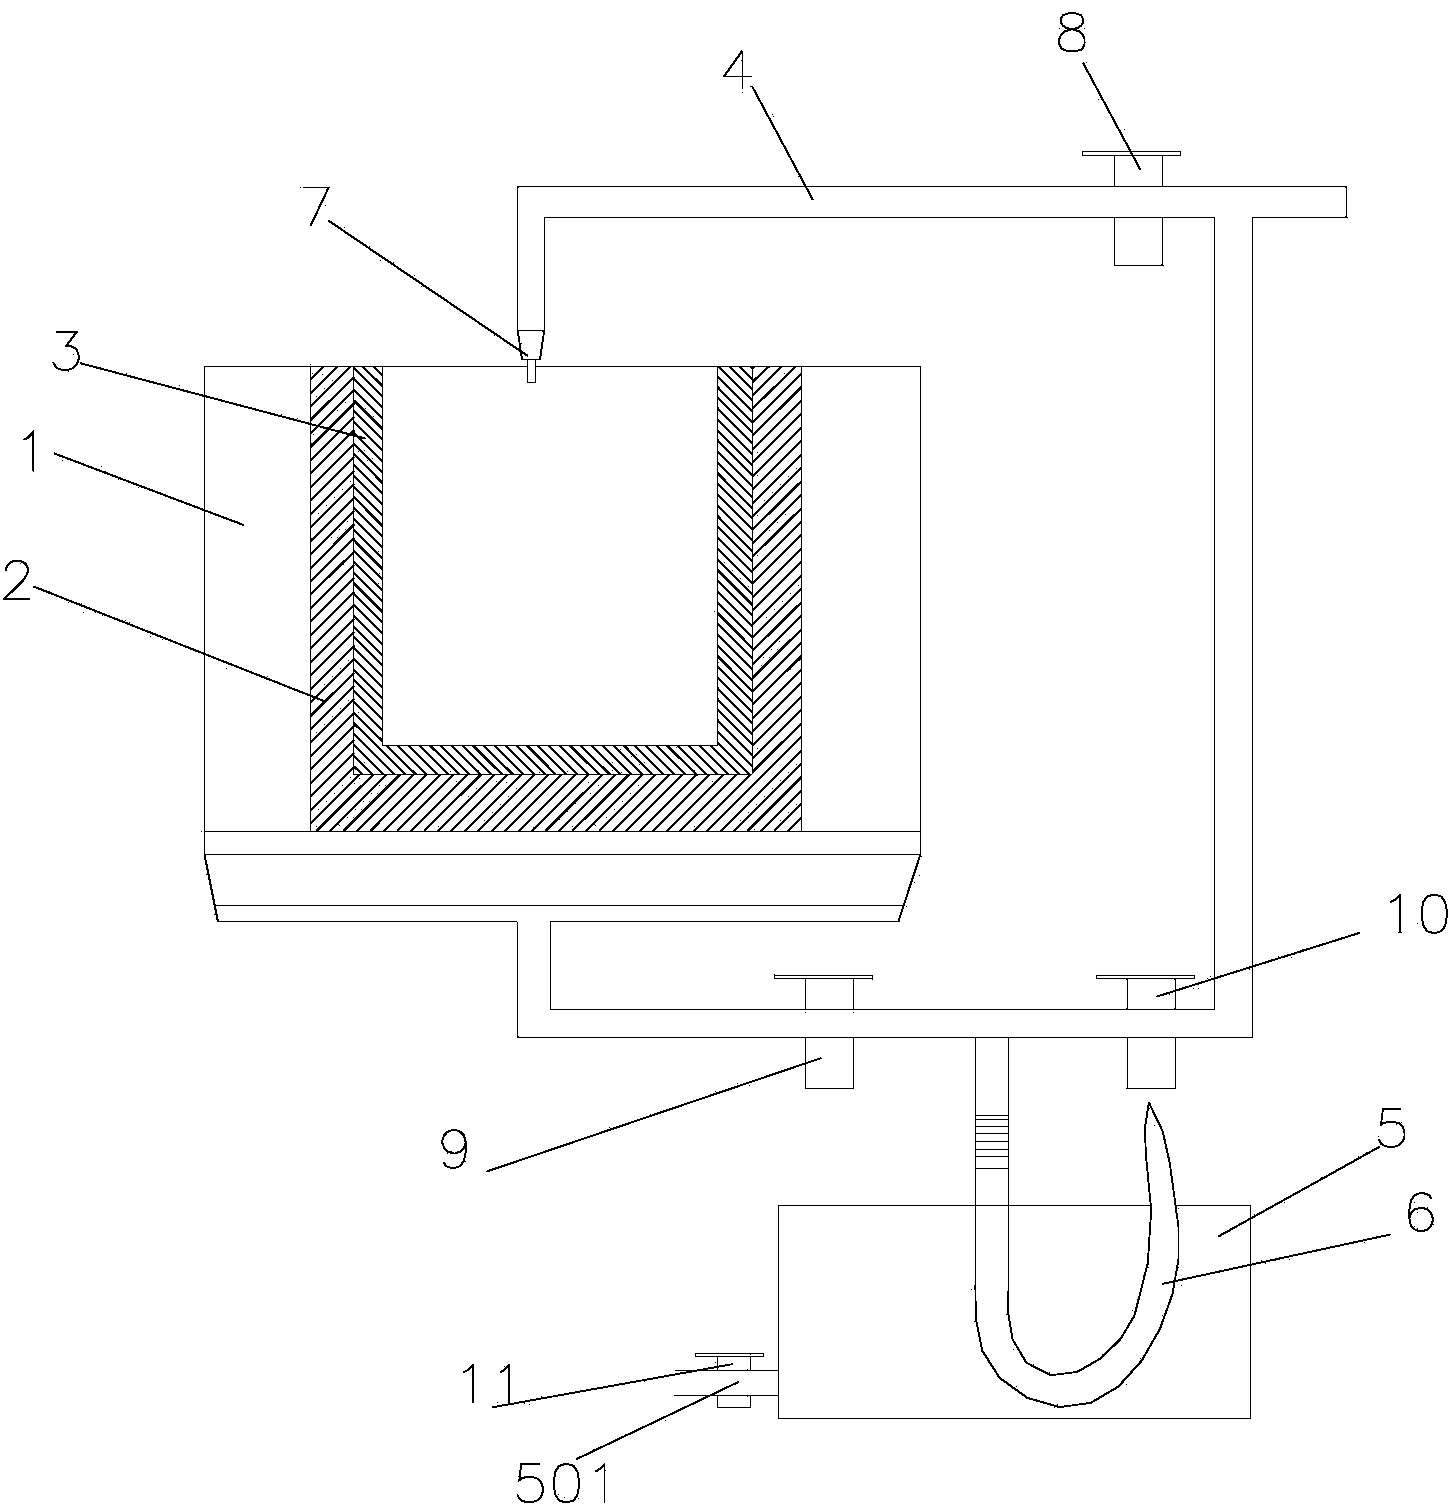 Sargassum horneri spore collecting device and use method thereof